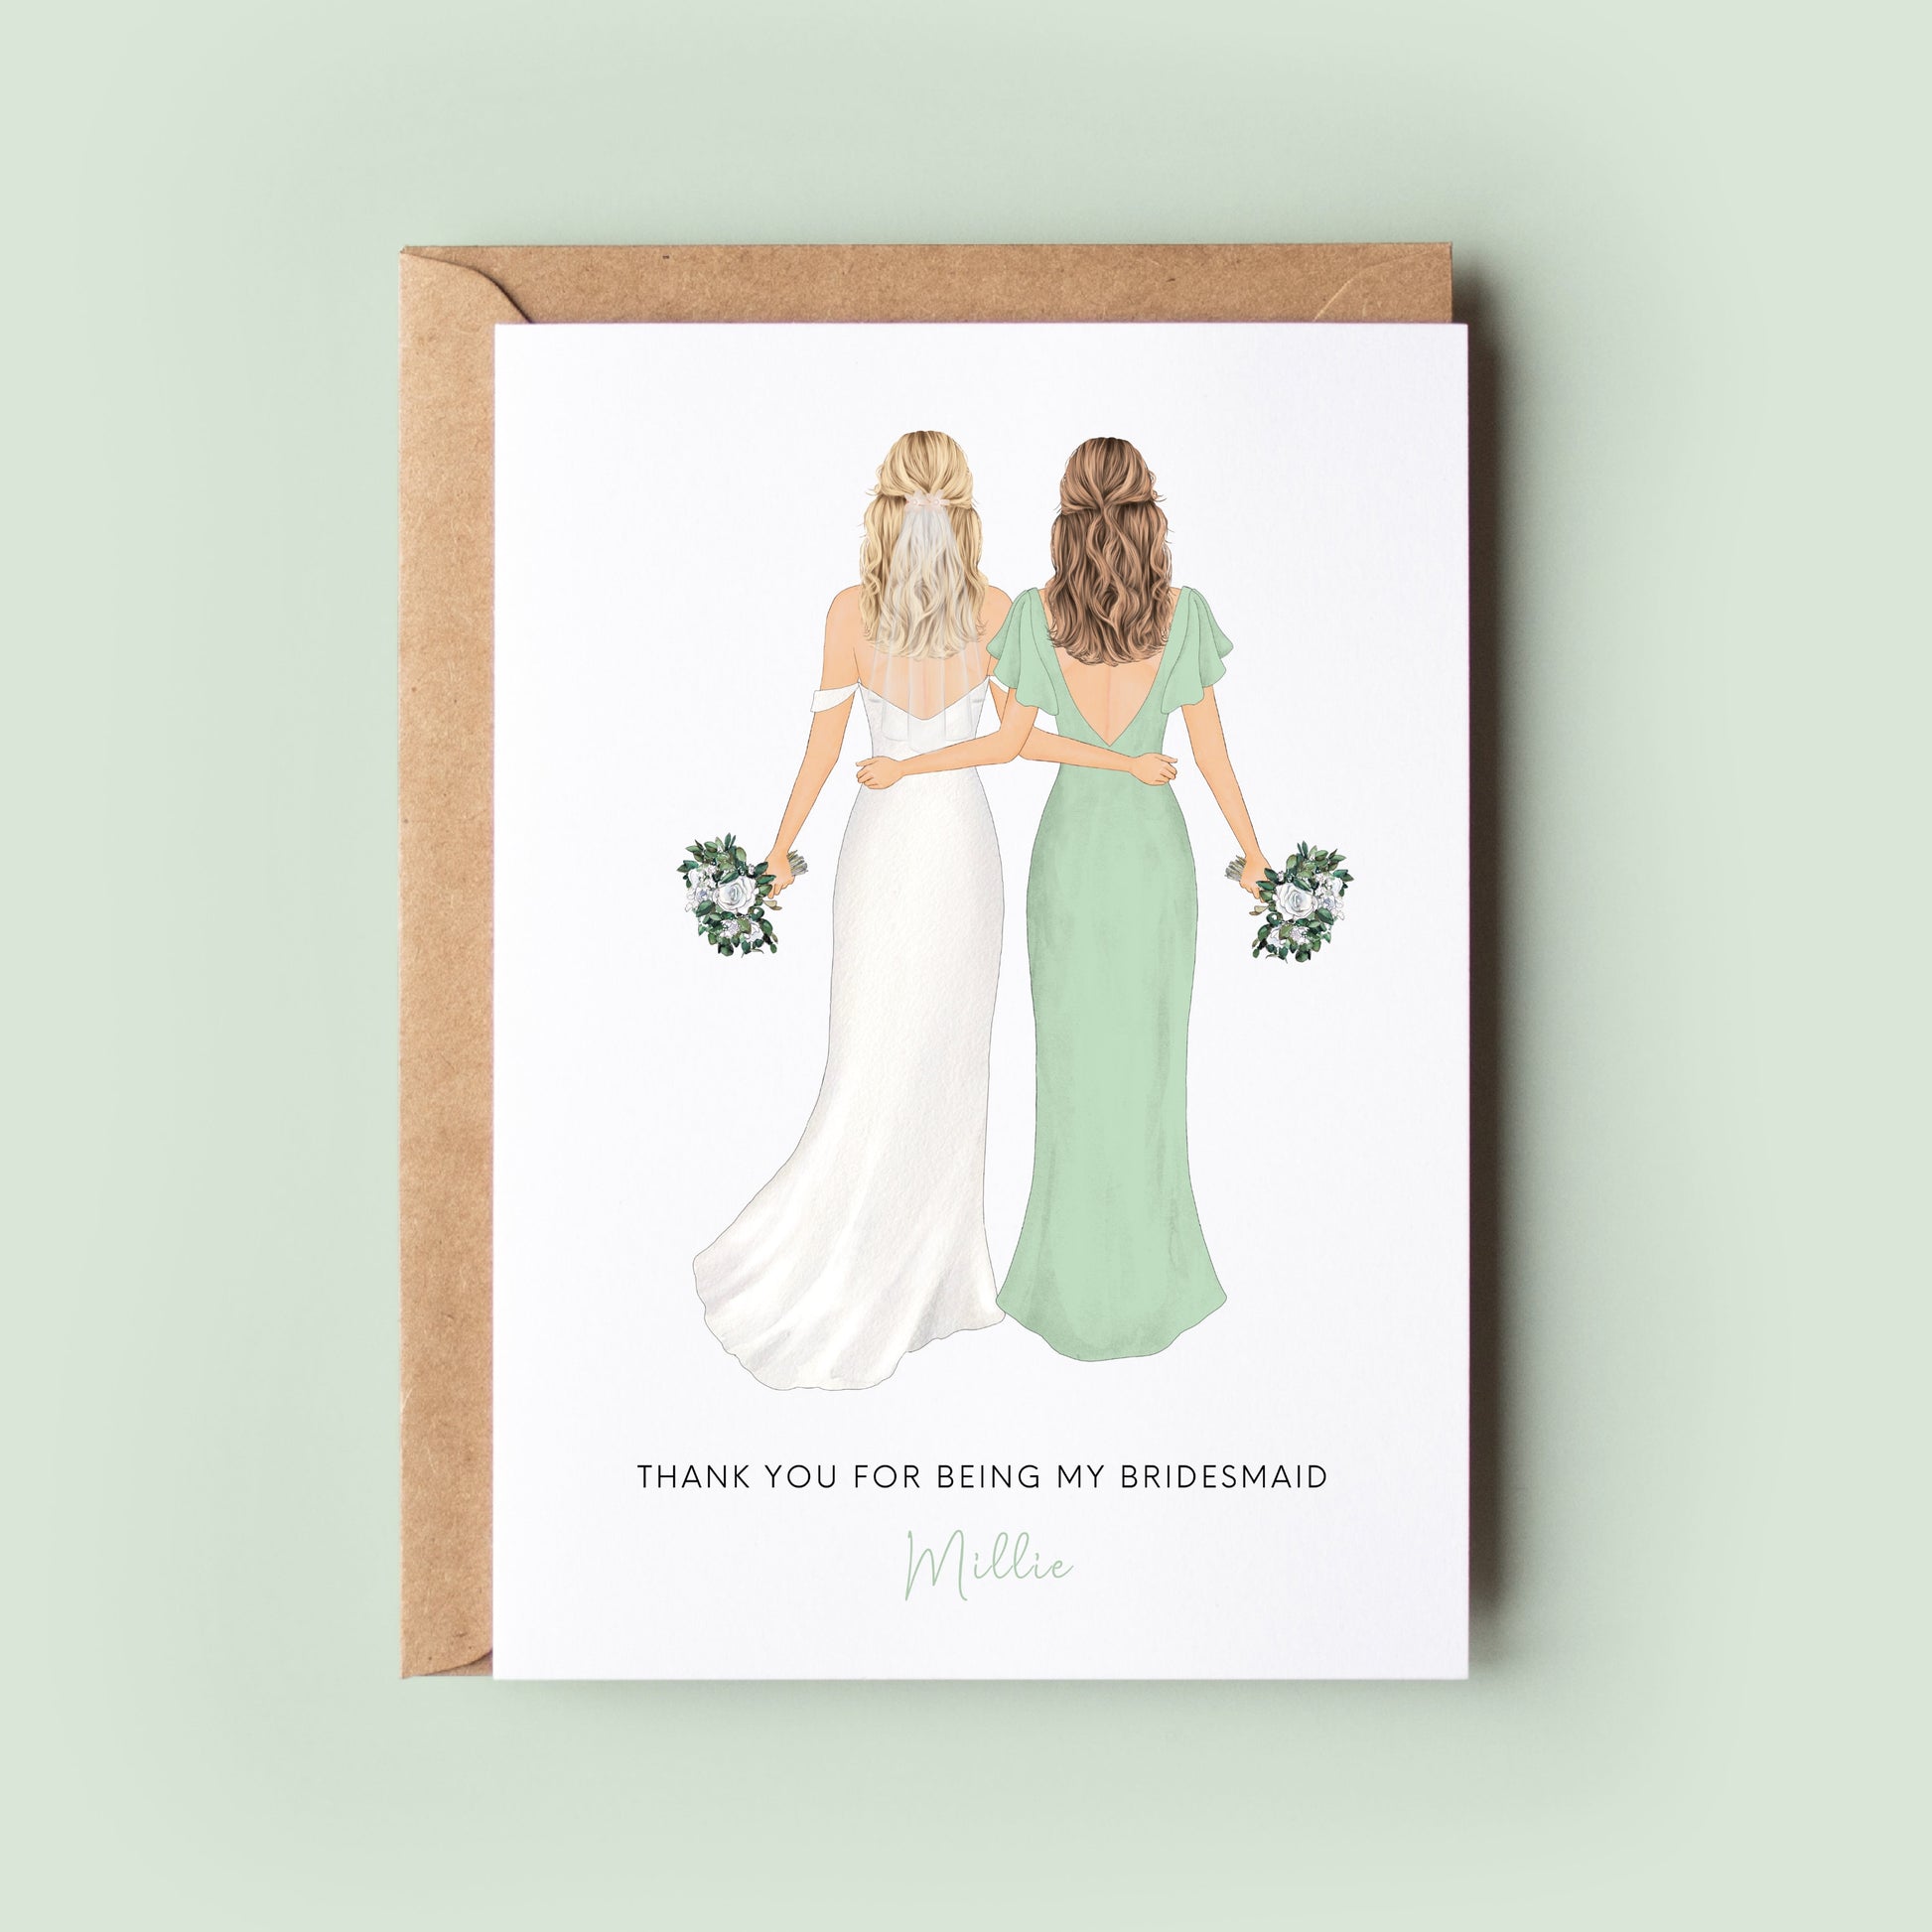 Personalised Bridesmaid Thank You Card, Maid of Honour Thank you Card, Customisable Bridesmaid Card, Wedding Thank Card, Bridesmaid #11000